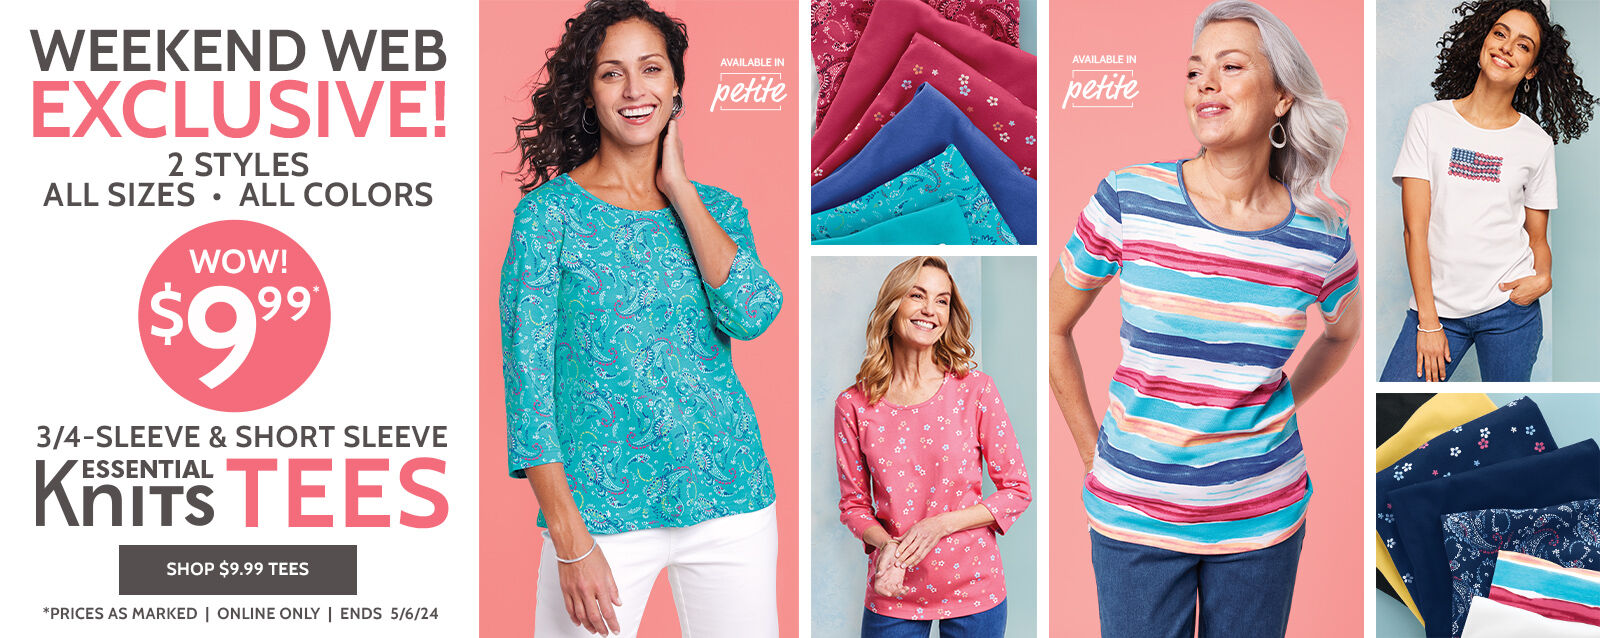 weekend web excuslive! wow! $9.99 2 styles. all sizes. all colors available in petite 3/4-sleeve & short sleeve essential knit tees shop $9.99 Tees *prices as marked | online only | ends 5/6/24